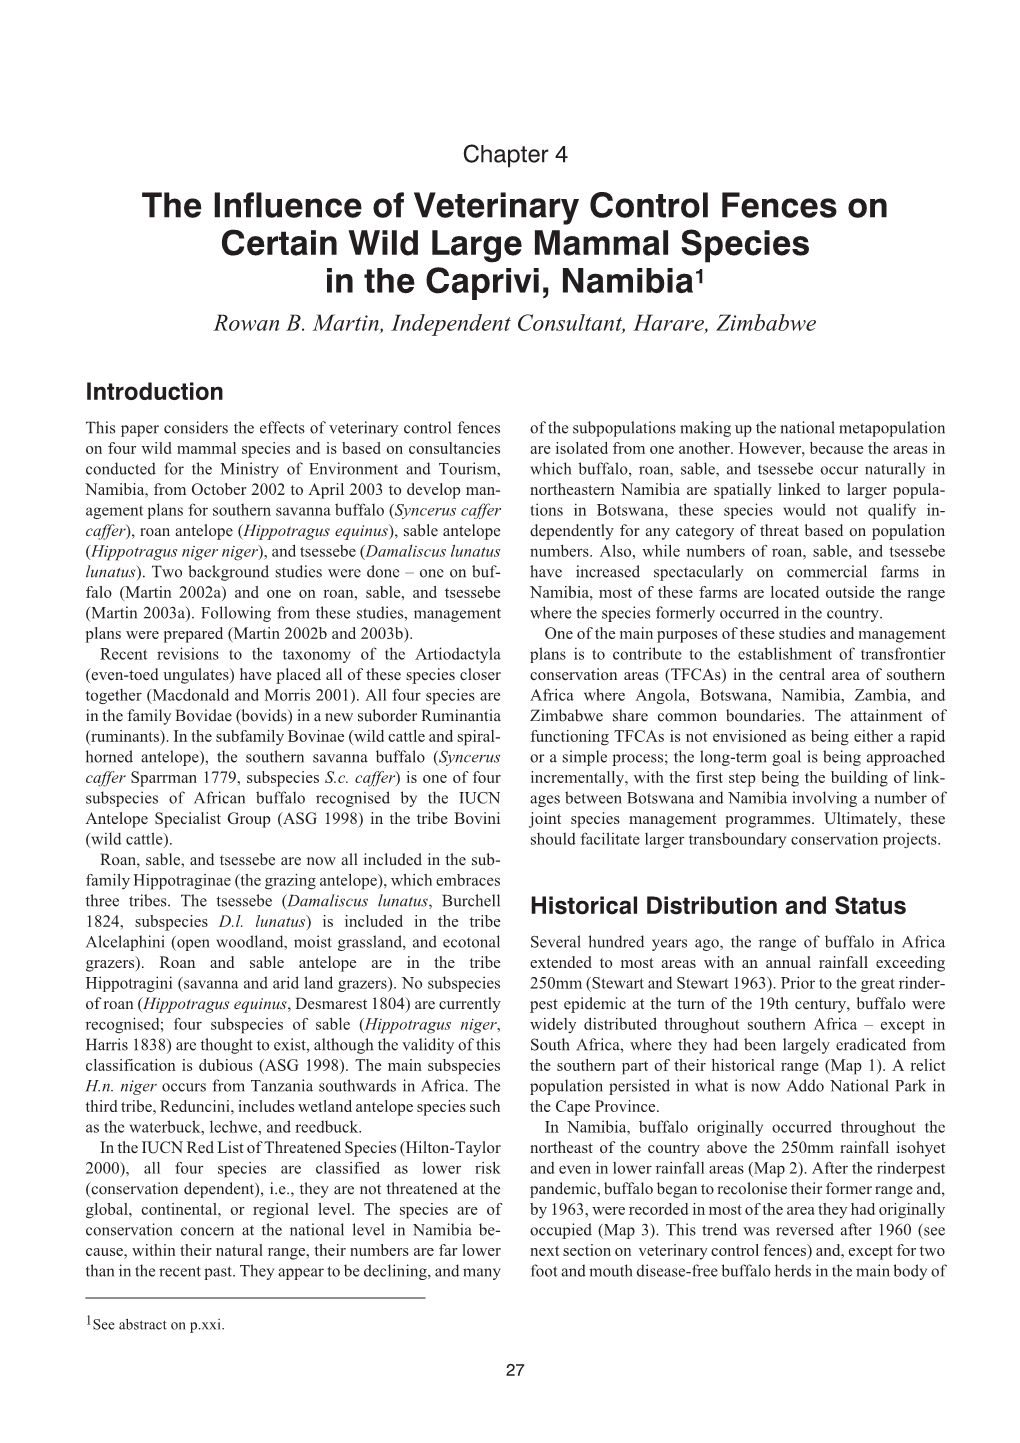 The Influence of Veterinary Control Fences on Certain Wild Large Mammal Species in the Caprivi, Namibia1 Rowan B